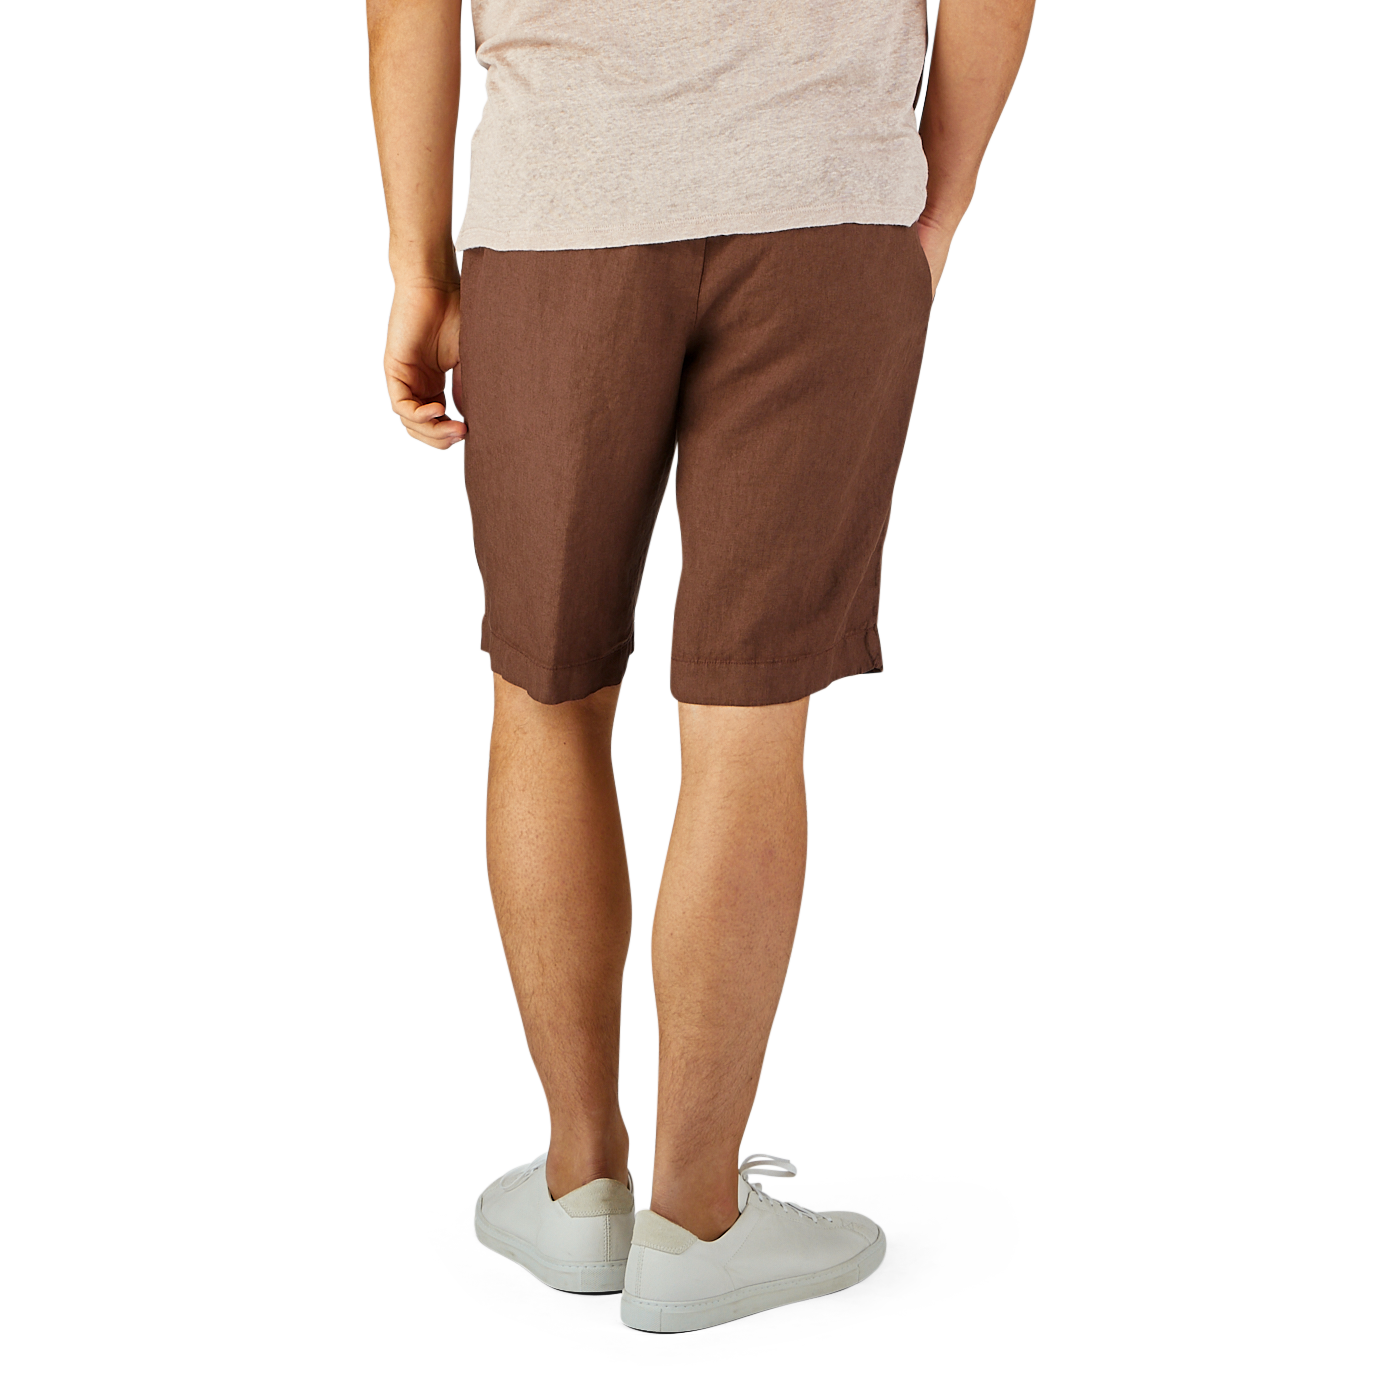 A man wearing a light beige T-shirt and Berwich's Terra Brown Washed Linen Drawstring Shorts, standing with white sneakers on a plain background.